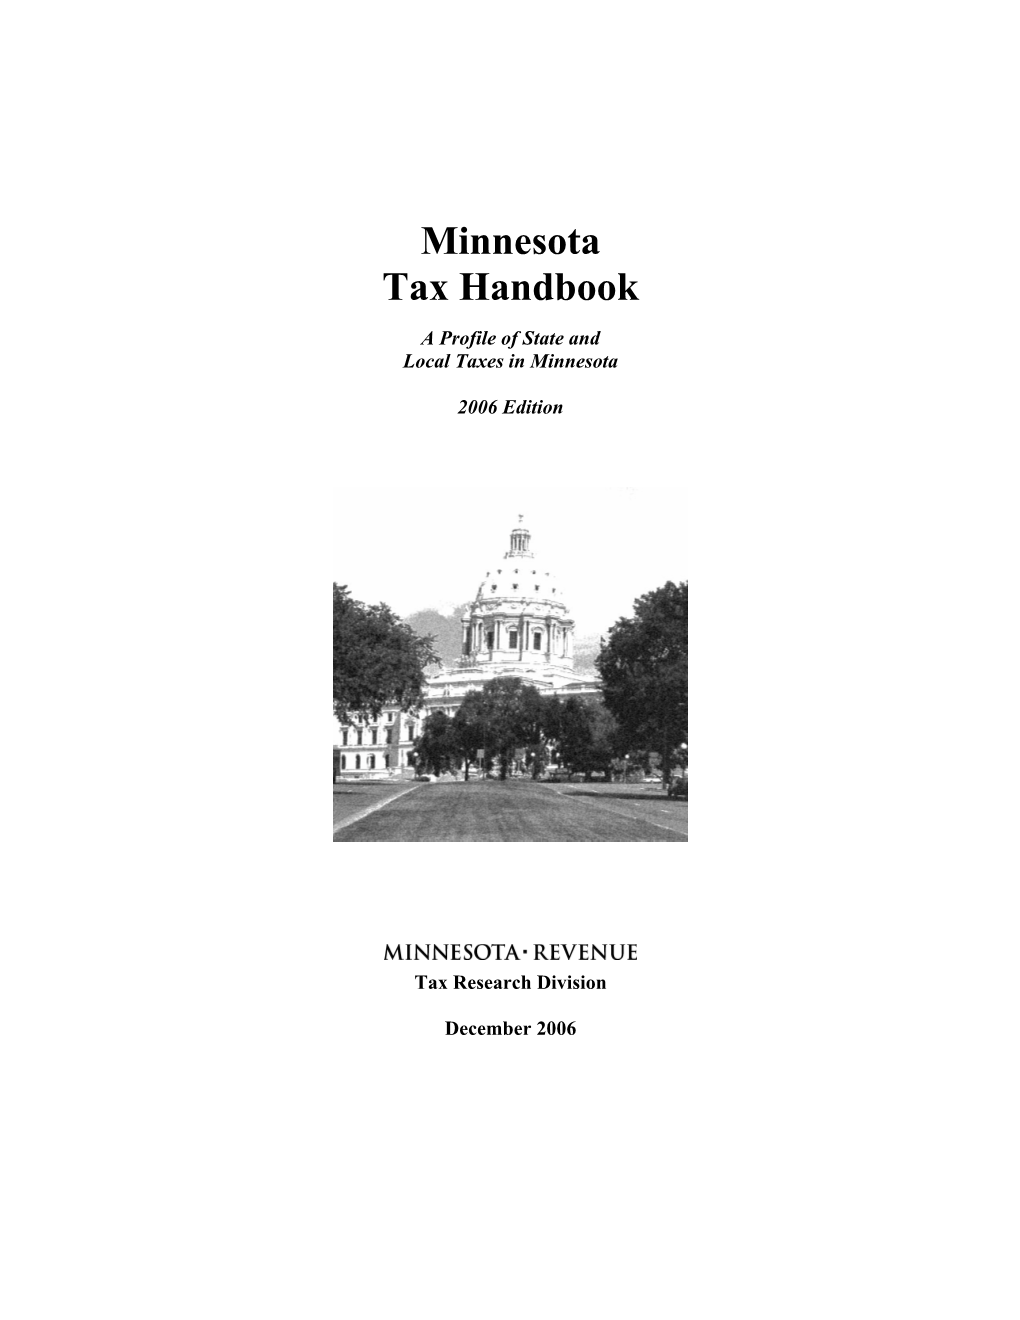 Minnesota Tax Handbook Provides General Information on Minnesota State and Local Taxes